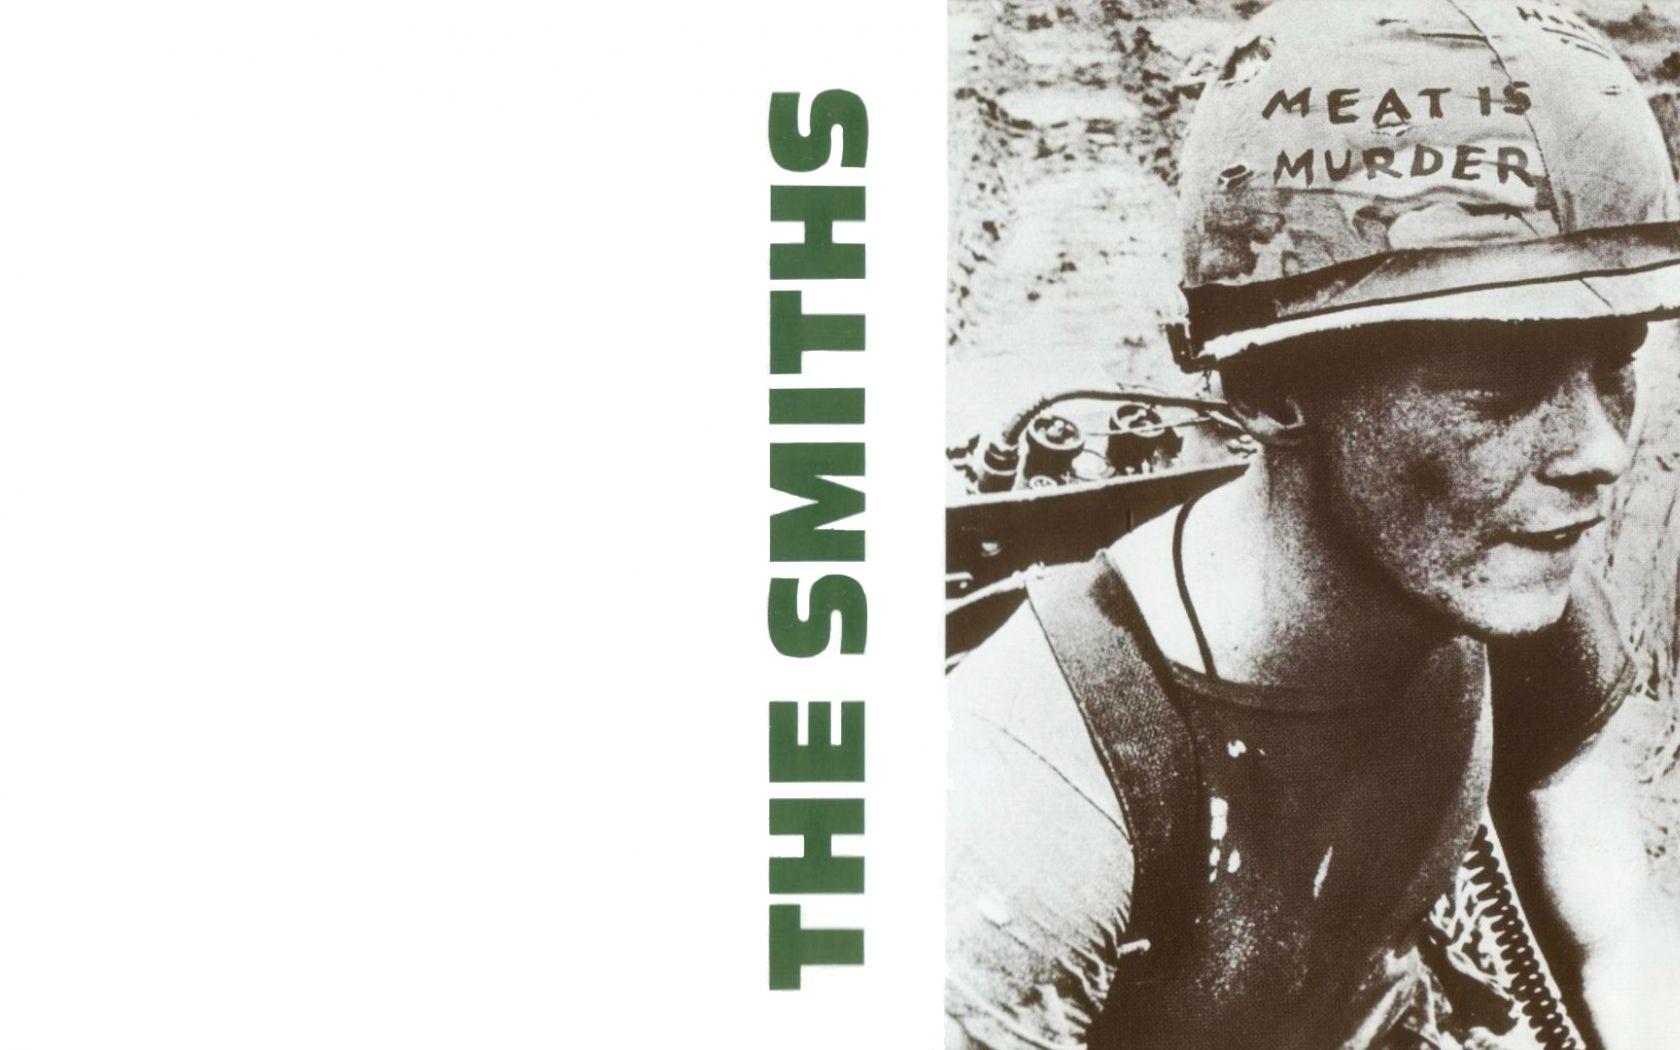 the smiths wallpaper iphone